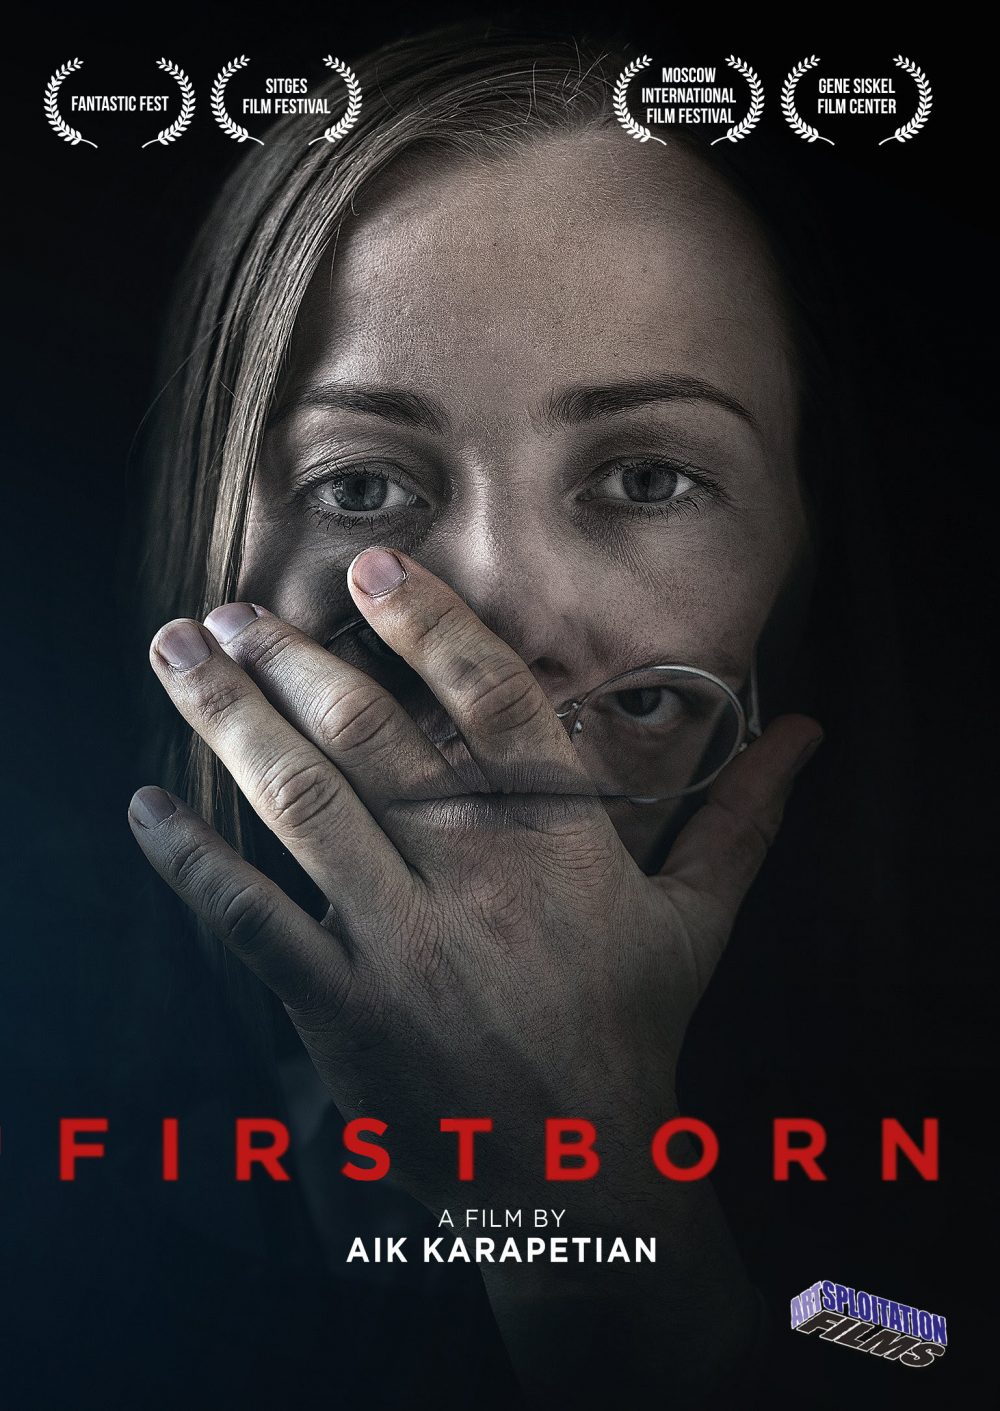 [News] Thriller FIRSTBORN Now Available on DVD and VOD